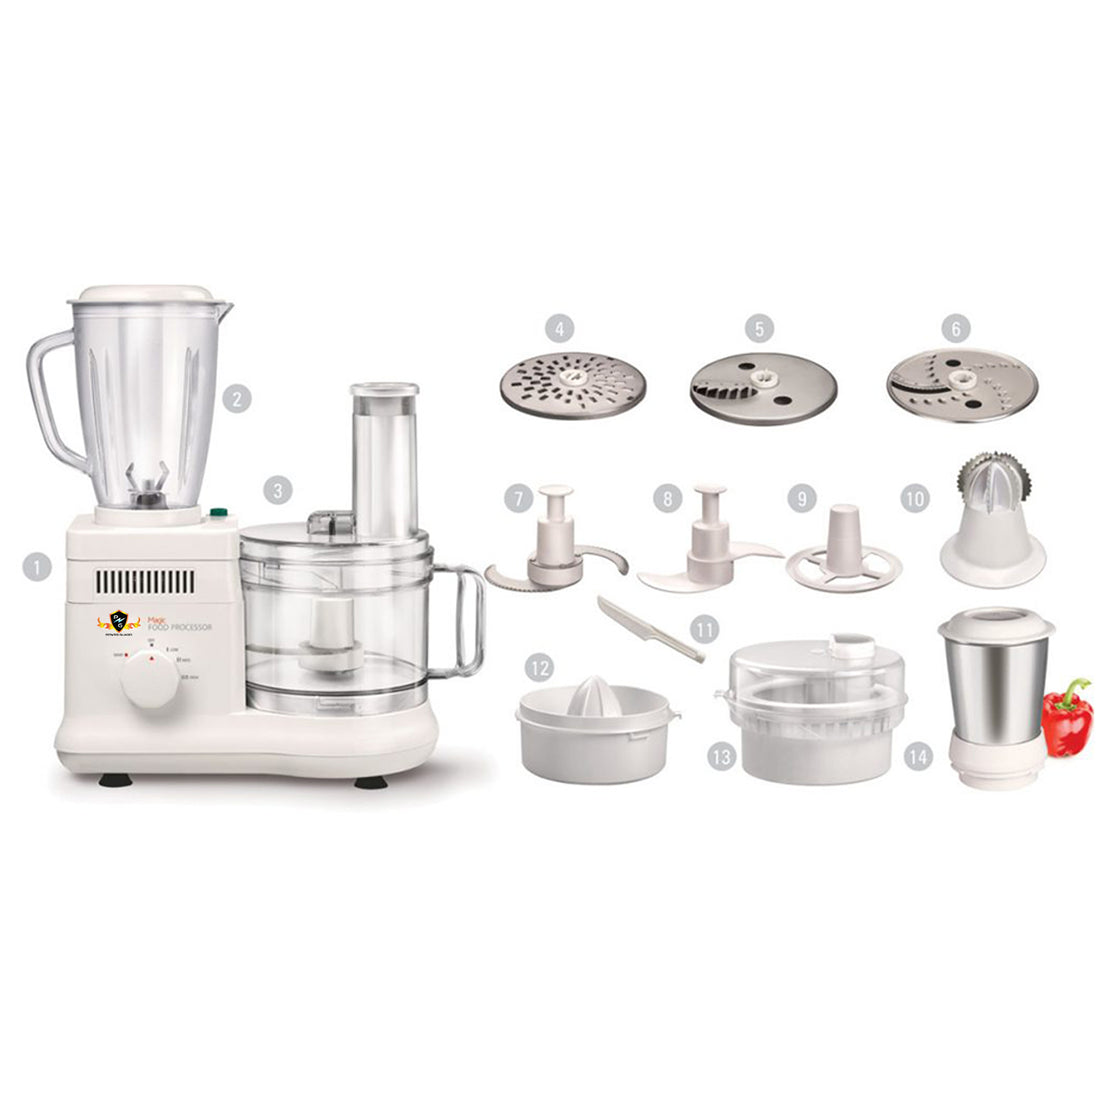 5 Must-Have Food Processor Attachments for Efficient Kitchen Tasks